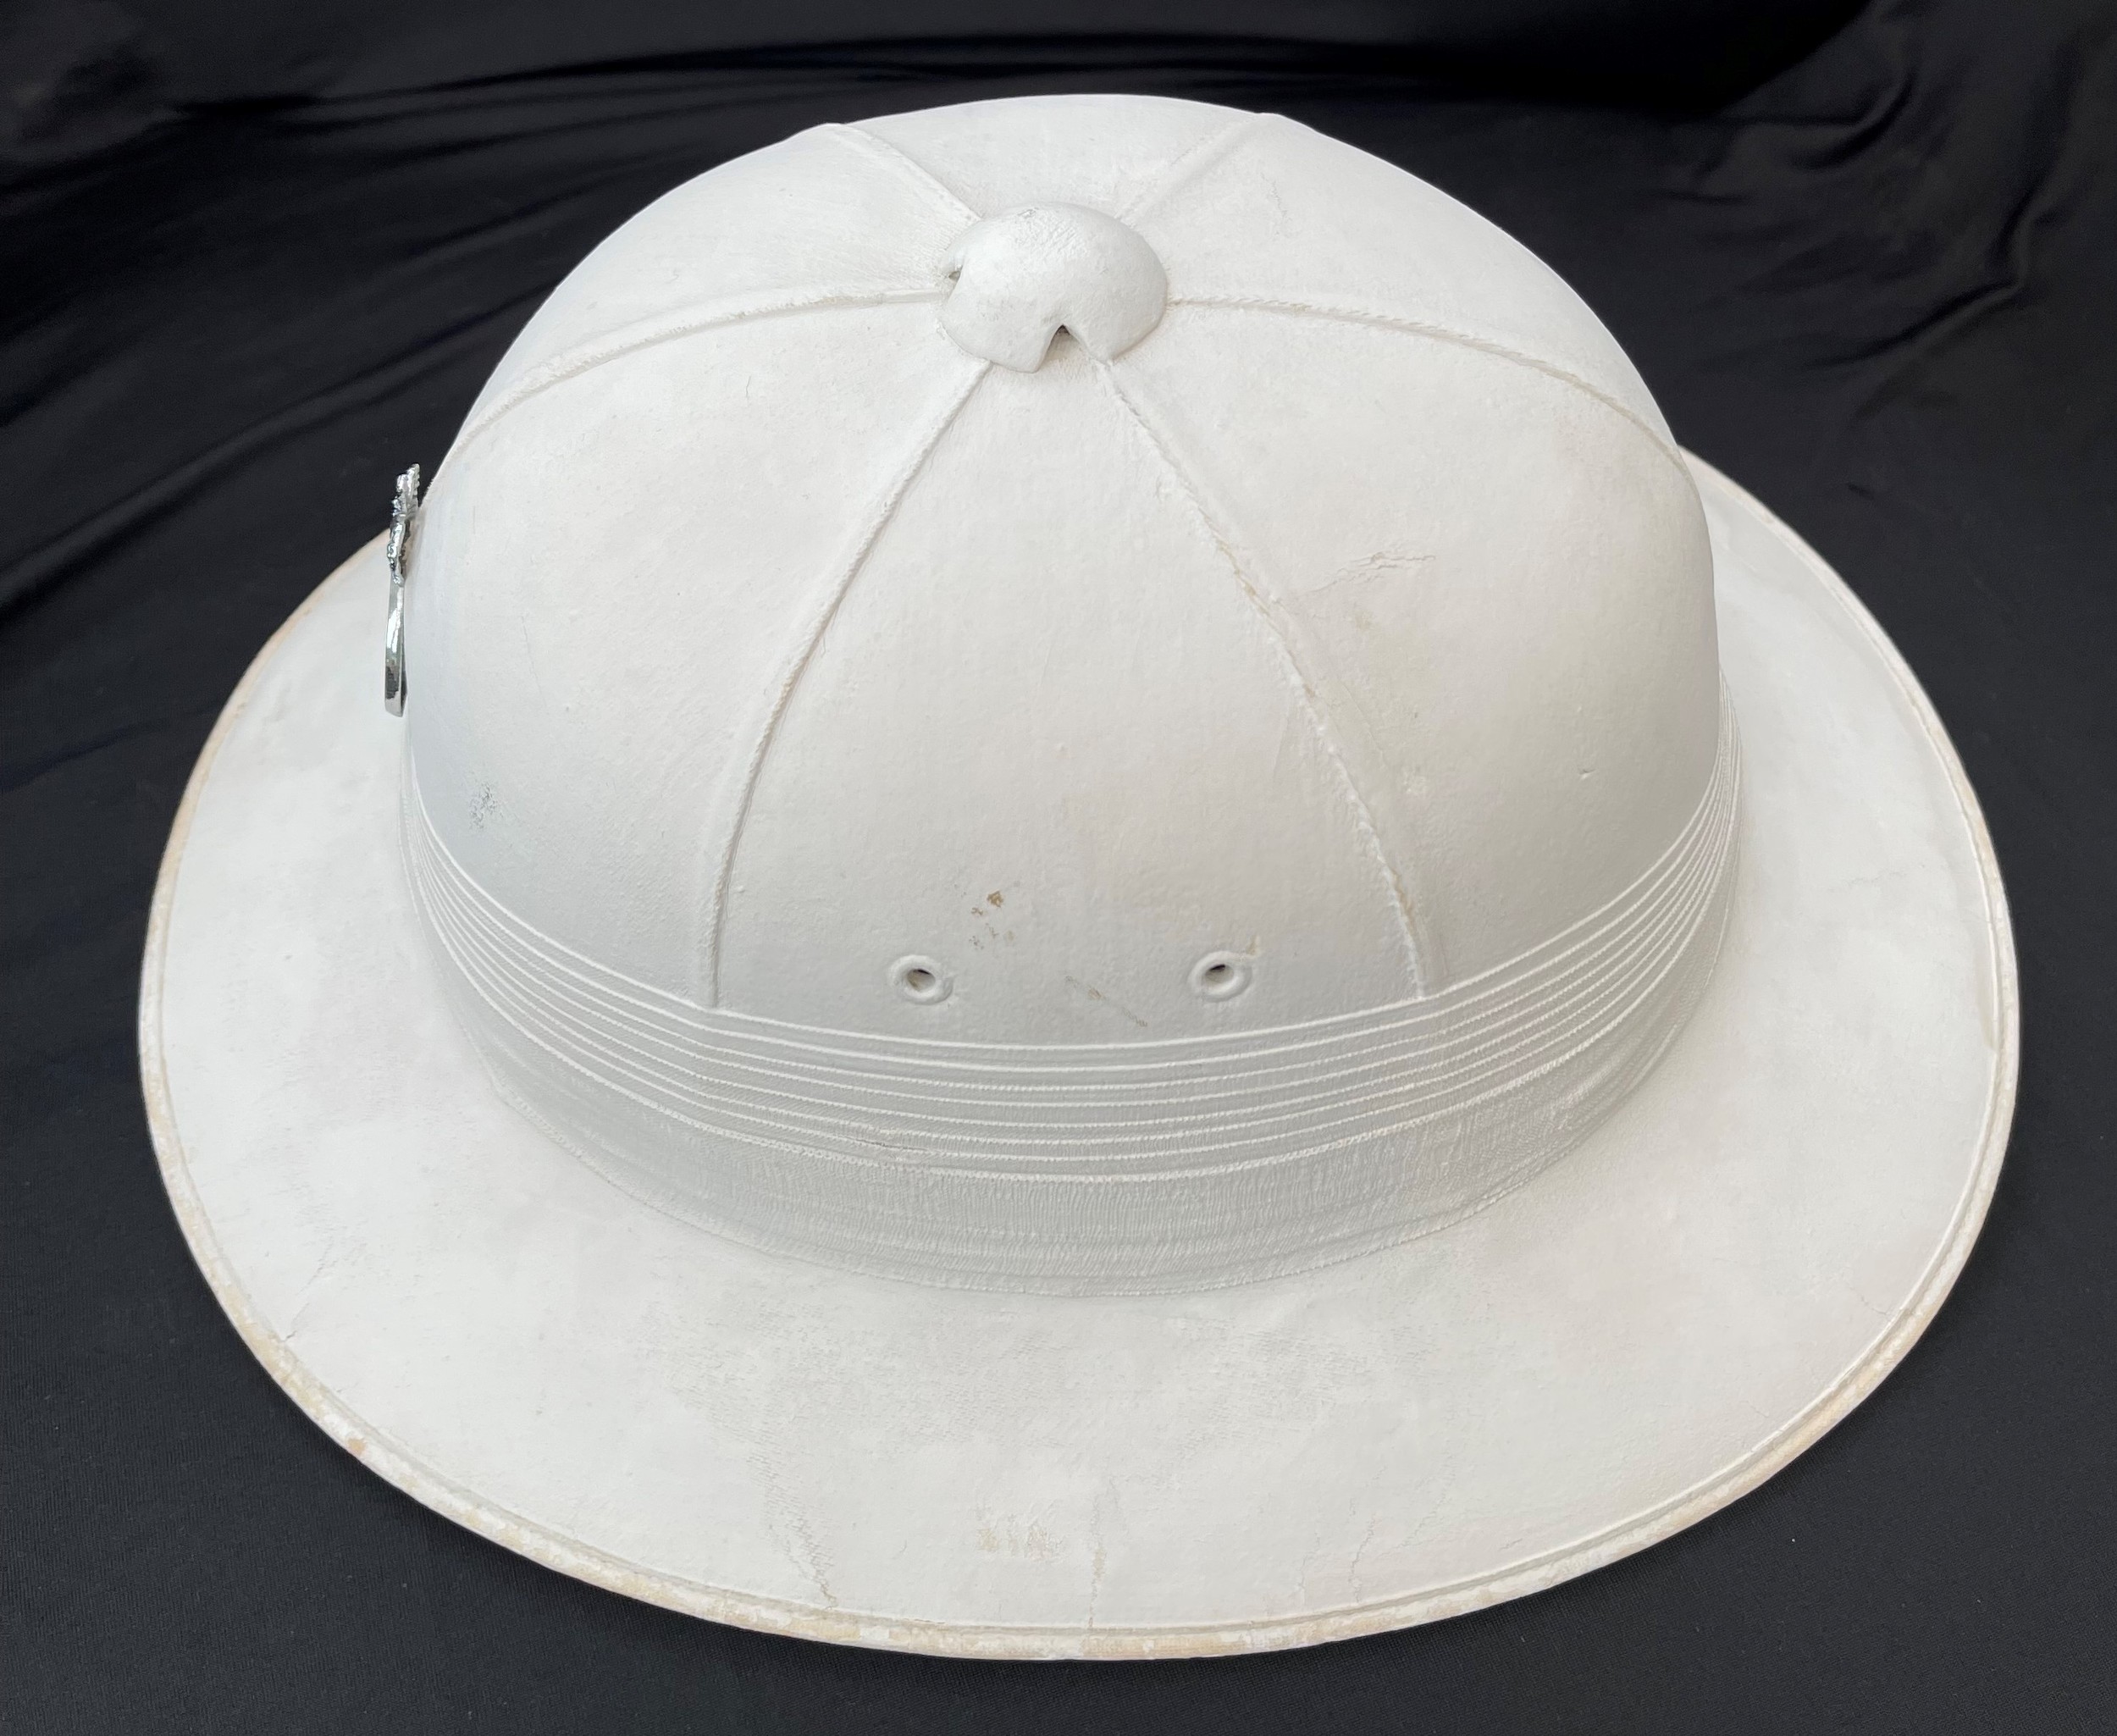 British Police Officers States of Jersey White Pith Helmet complete with Queens Crown Cap Badge. - Image 4 of 5